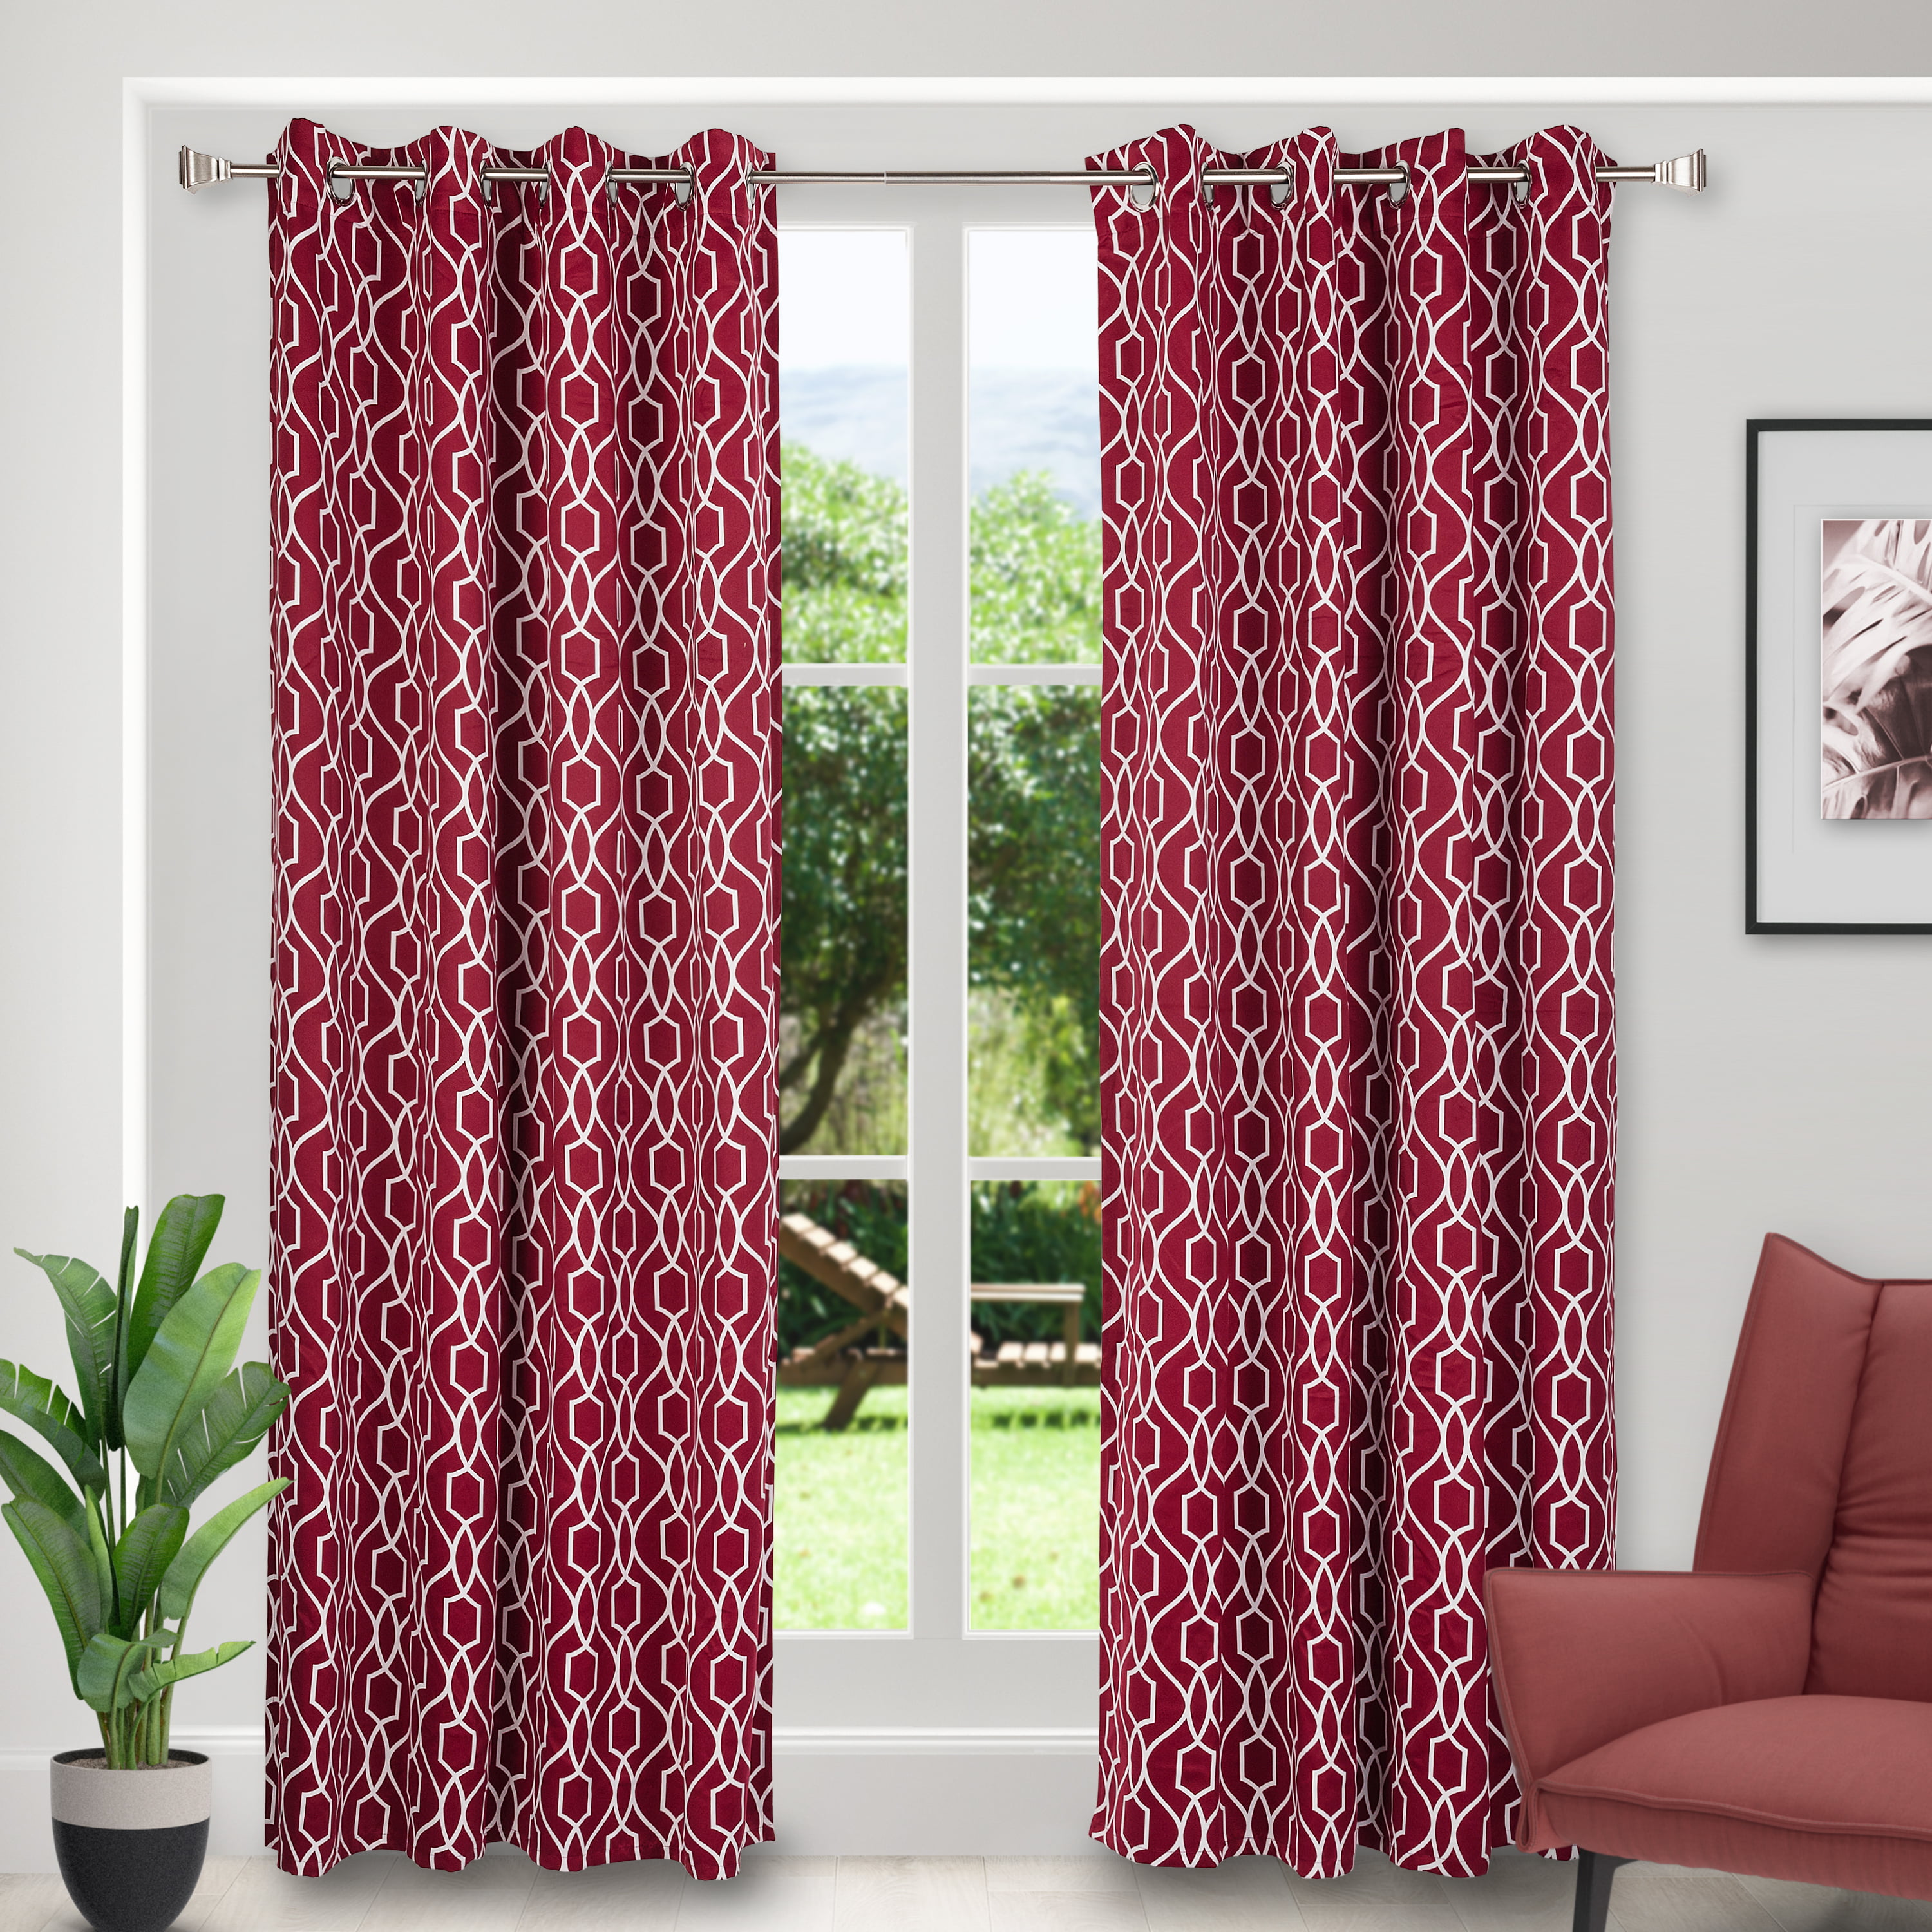 Blackout Curtains Thermal Insulated Printed Grommet Curtain Drapes 52 x